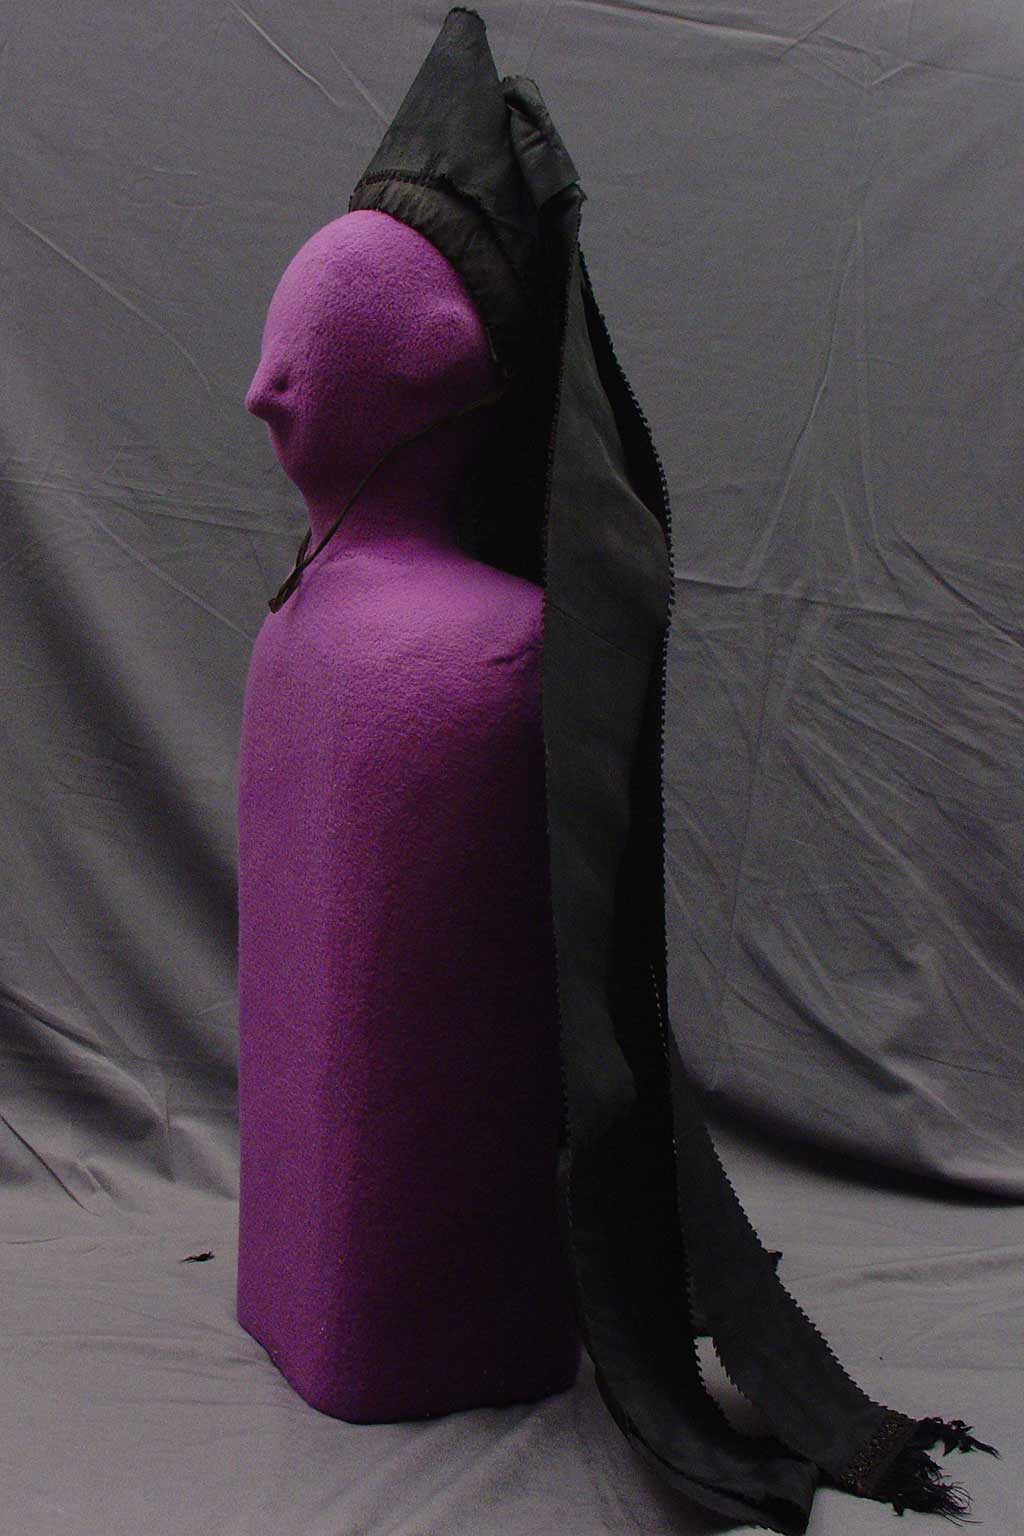 profile view, Conical bonnet covered in black silk, with two lengths of the same material doubled and extending down the back.